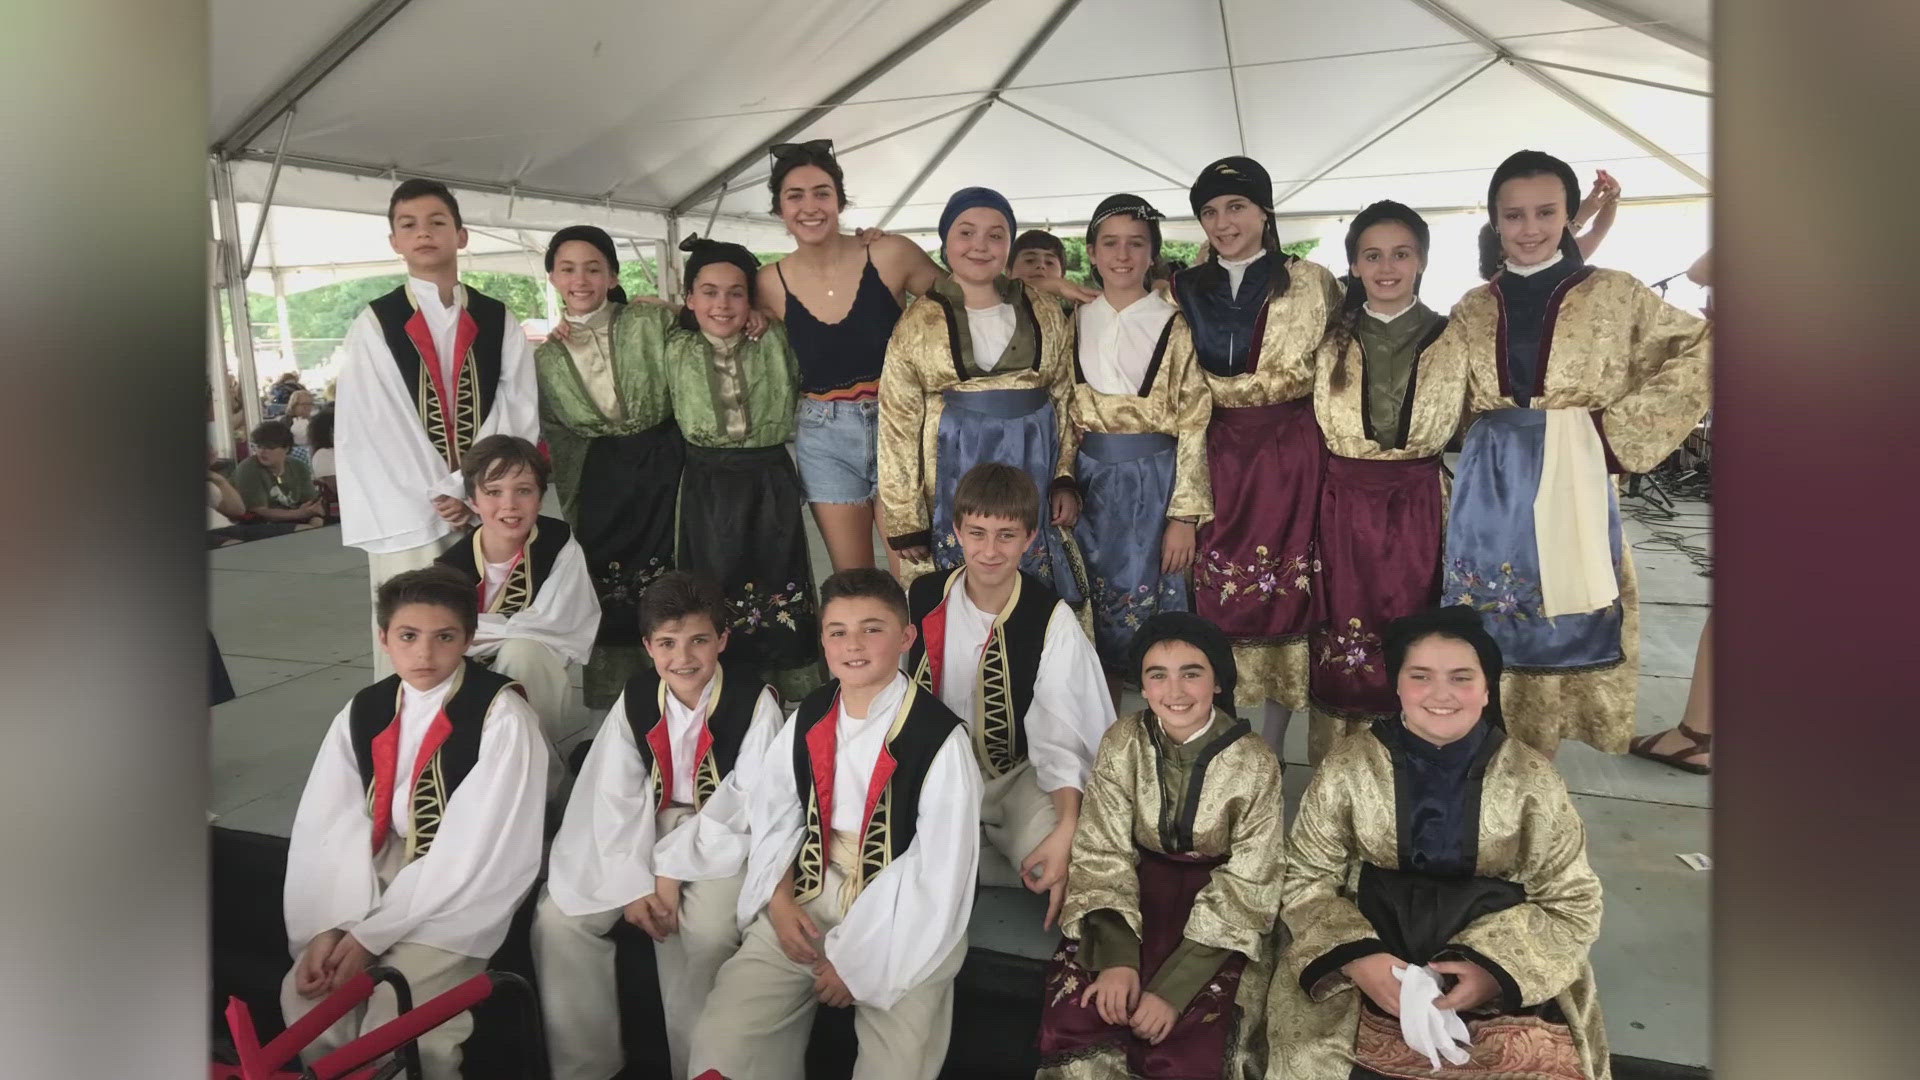 Triad Greek Festival gives insight into what it means to be Greek